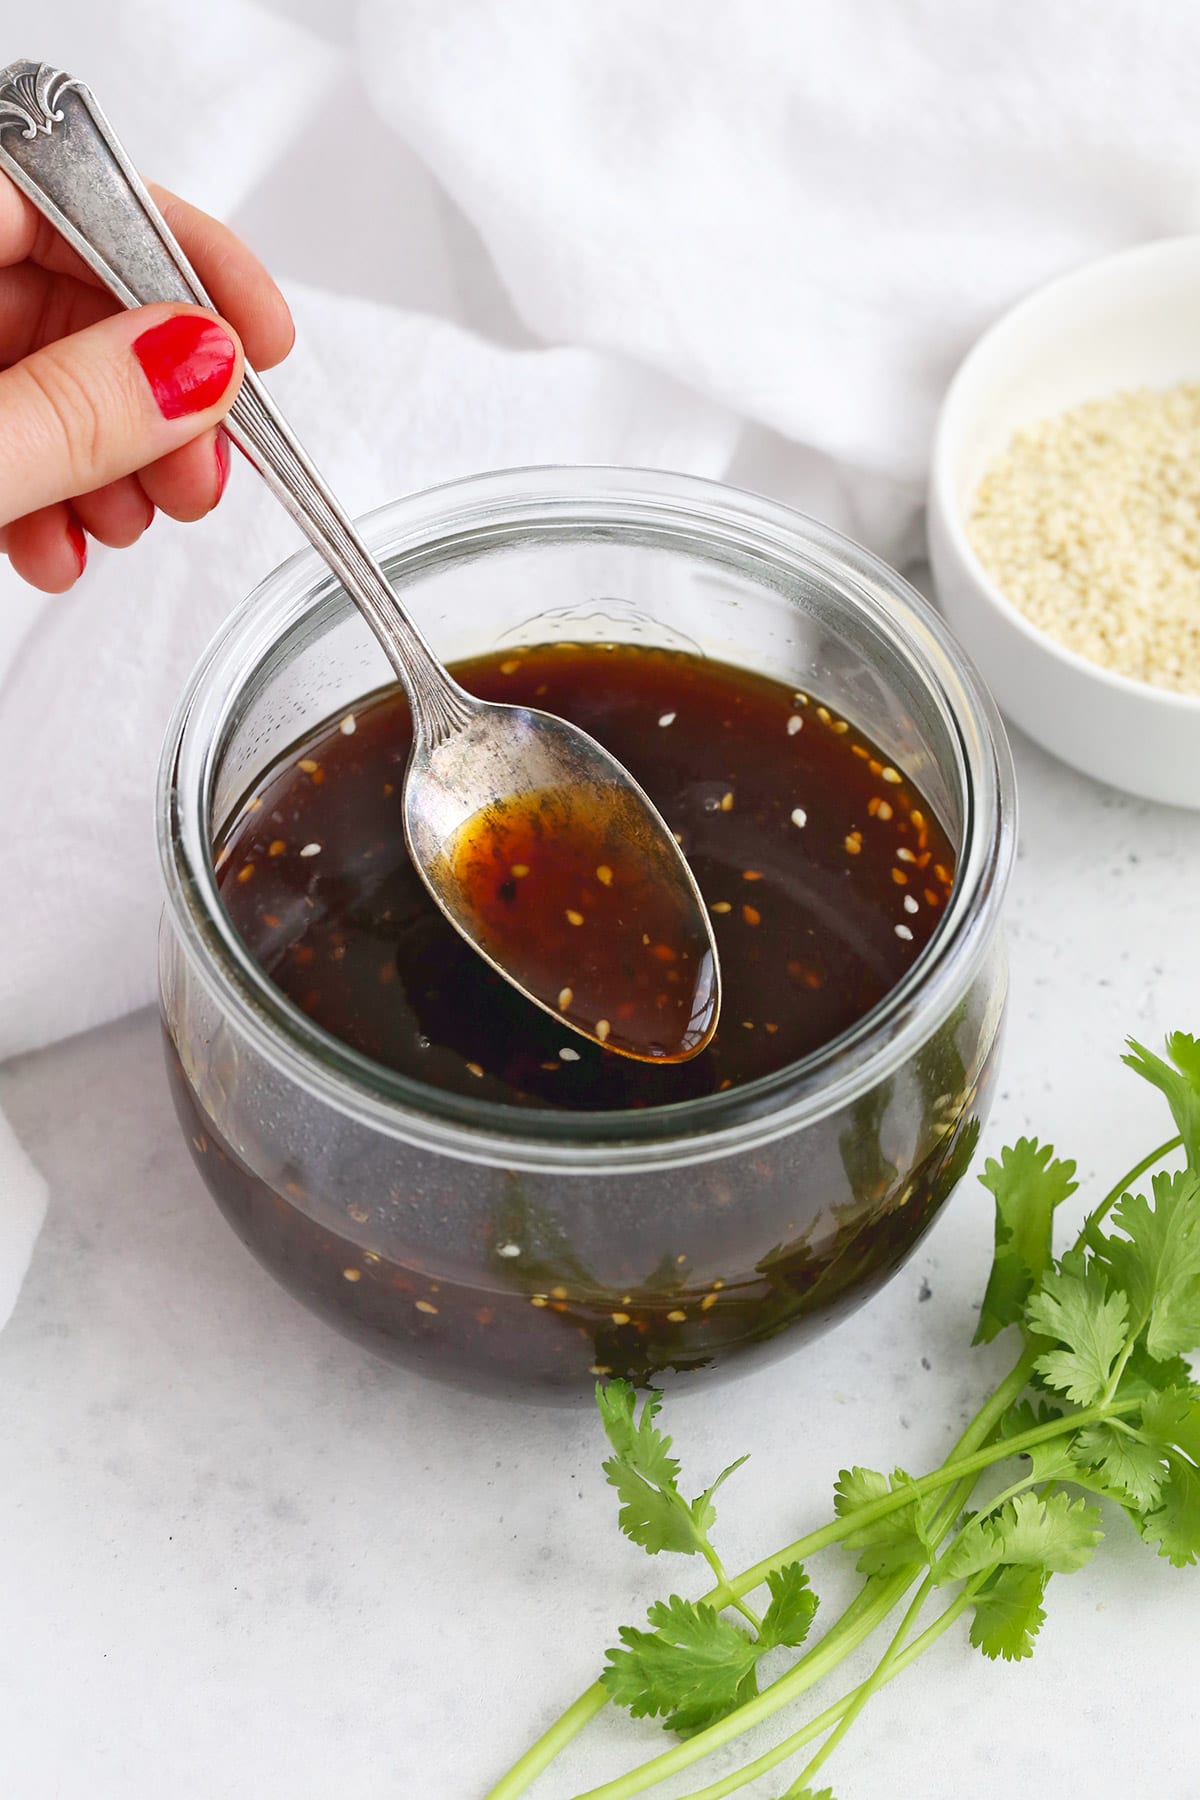 A tangy and sweet condiment teriyaki sauce in a glass container